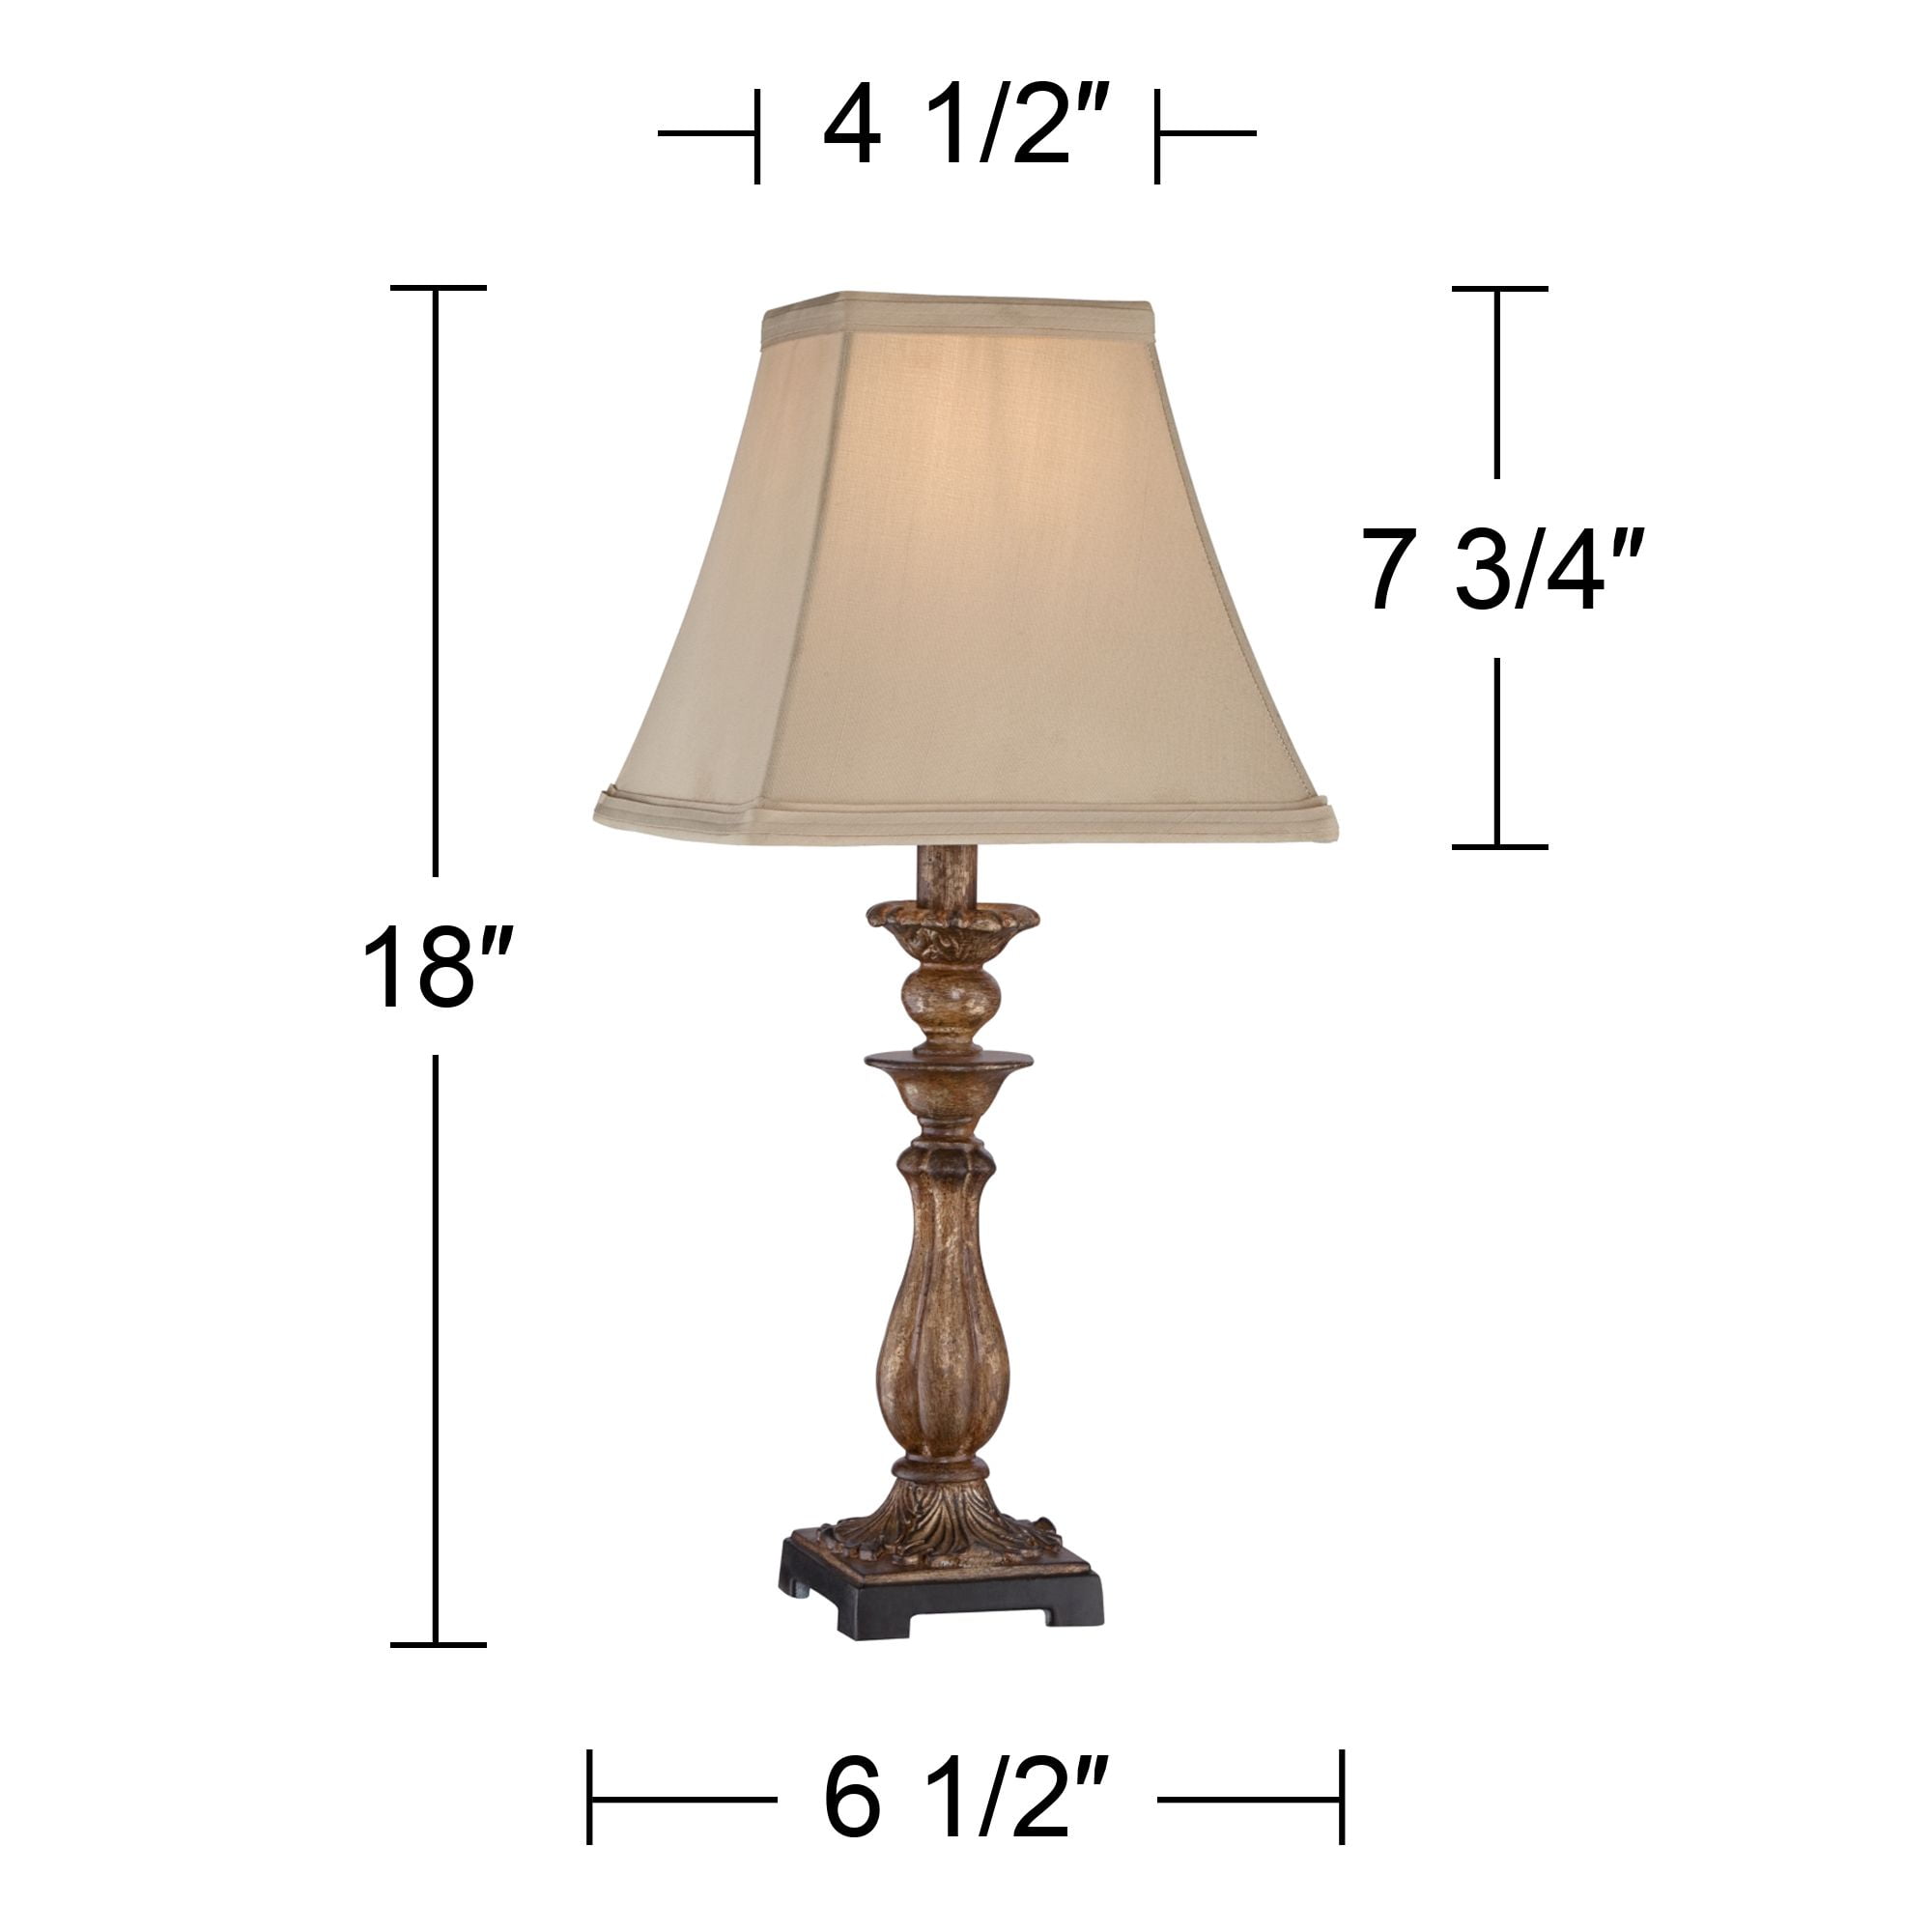 Regency Hill Shabby Chic French Country Cottage Table Lamp 28 Tall Antique  White Washed Petite Artichoke Font Beige Fabric Bell Shade for Living Room